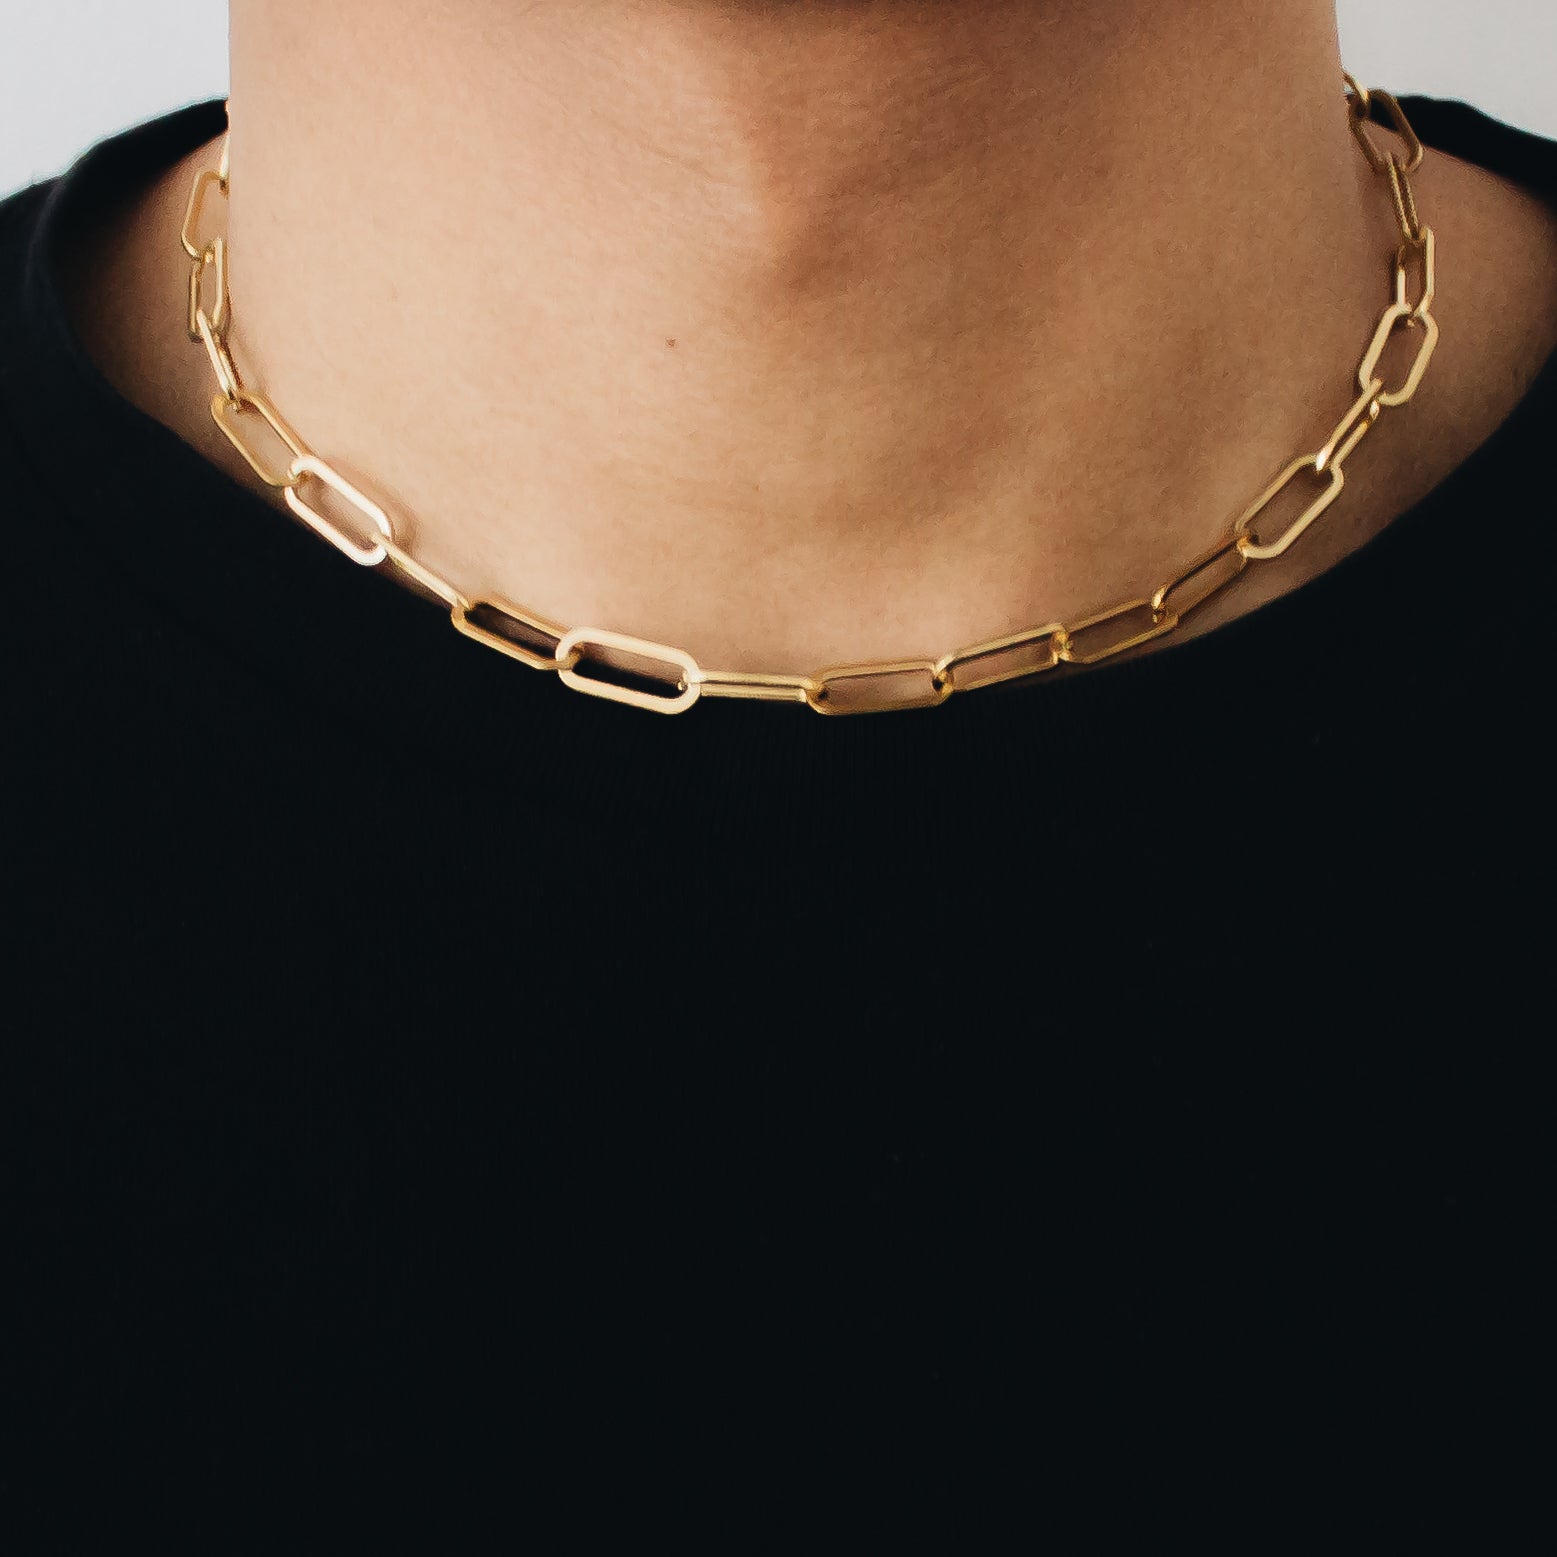 CONNECTION Necklace - Gold